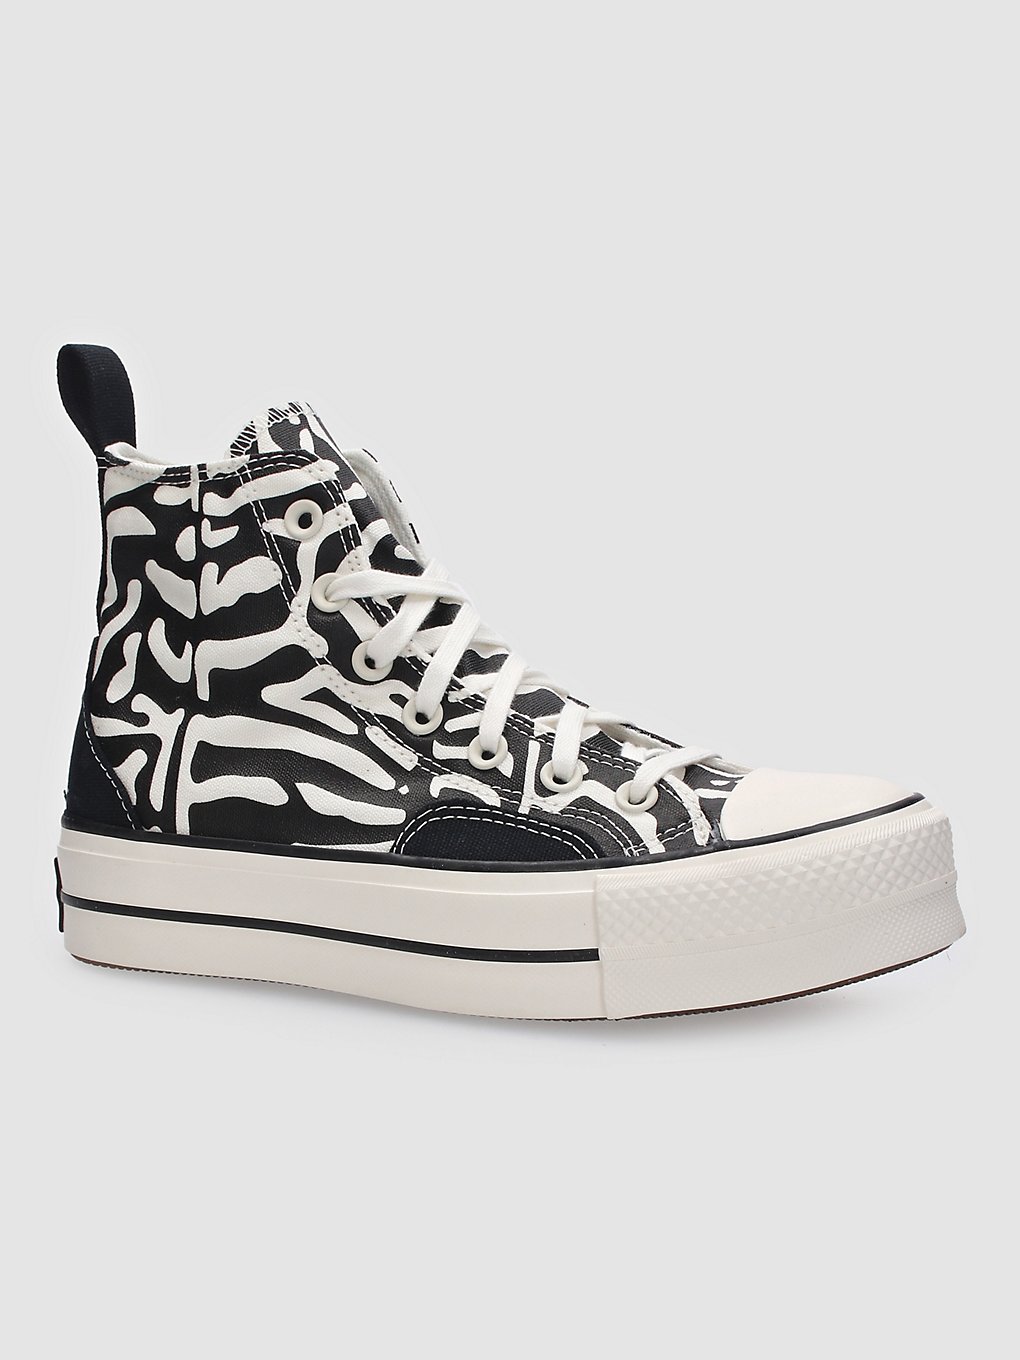 Converse Chuck Taylor All Star Lift Sneakers patroon